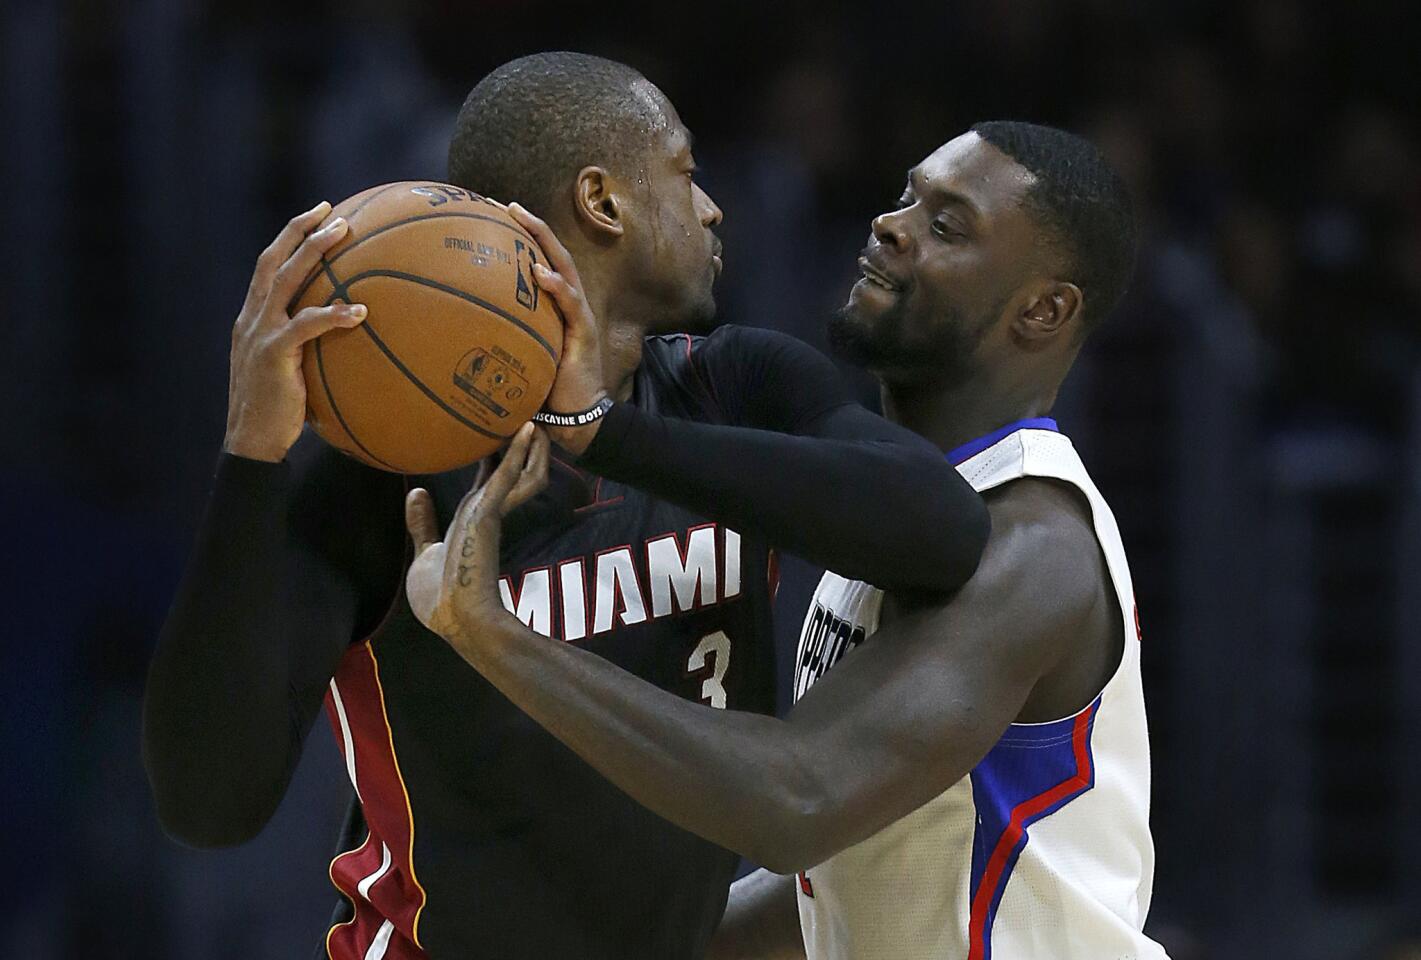 Clippers' Lance Stephenson picks up his game with Paul Pierce resting